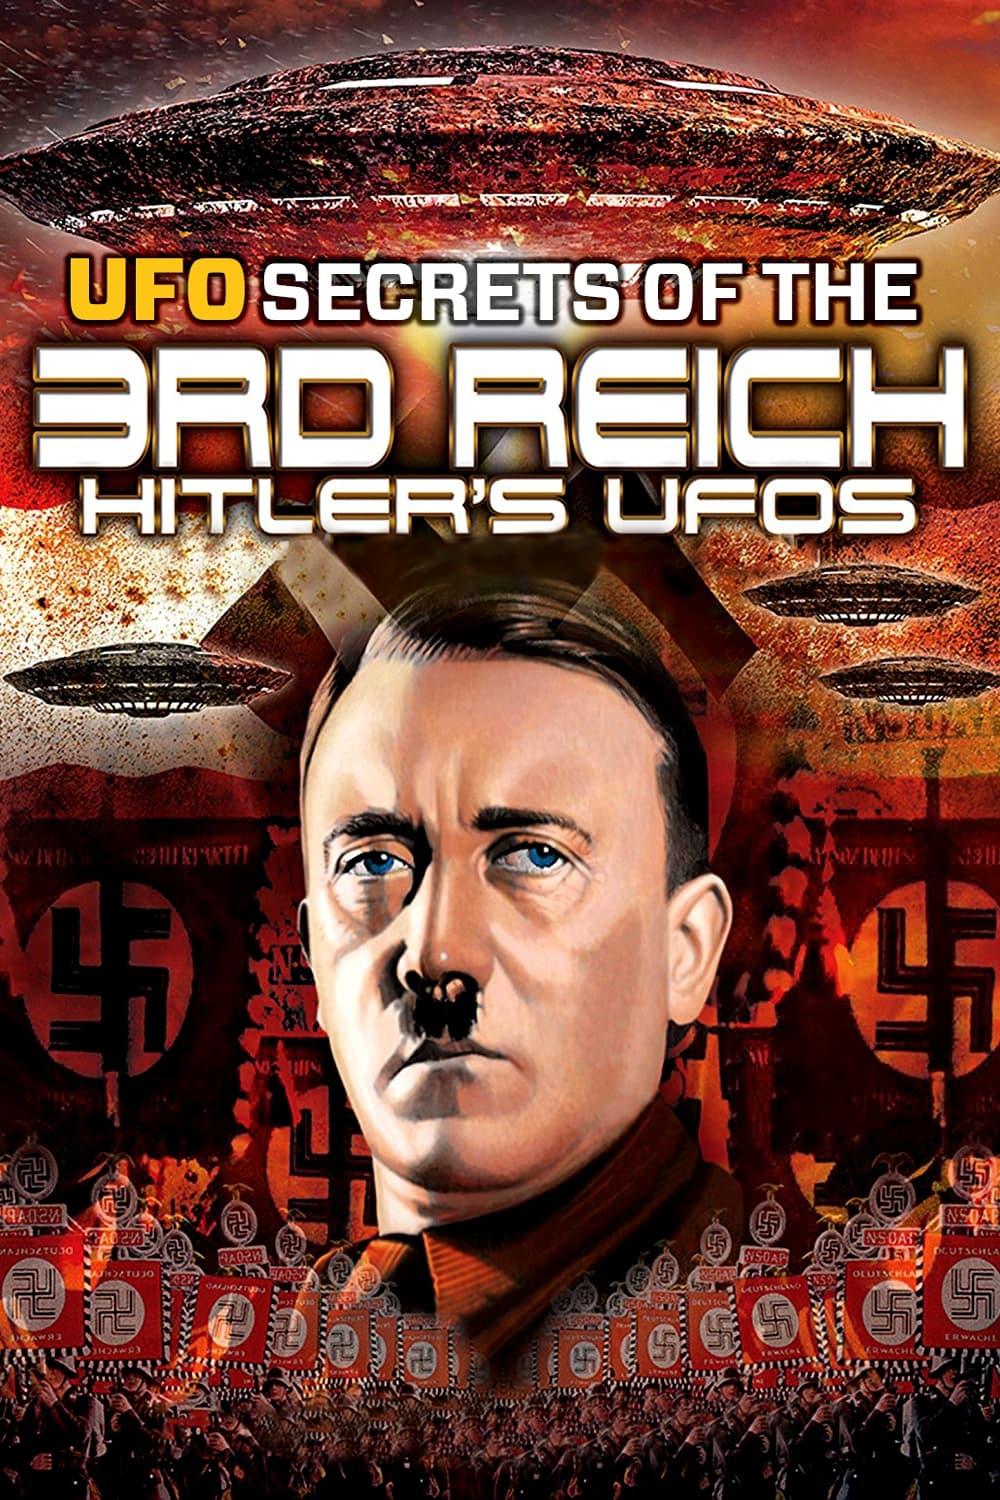 UFO: Secrets of the Third Reich poster